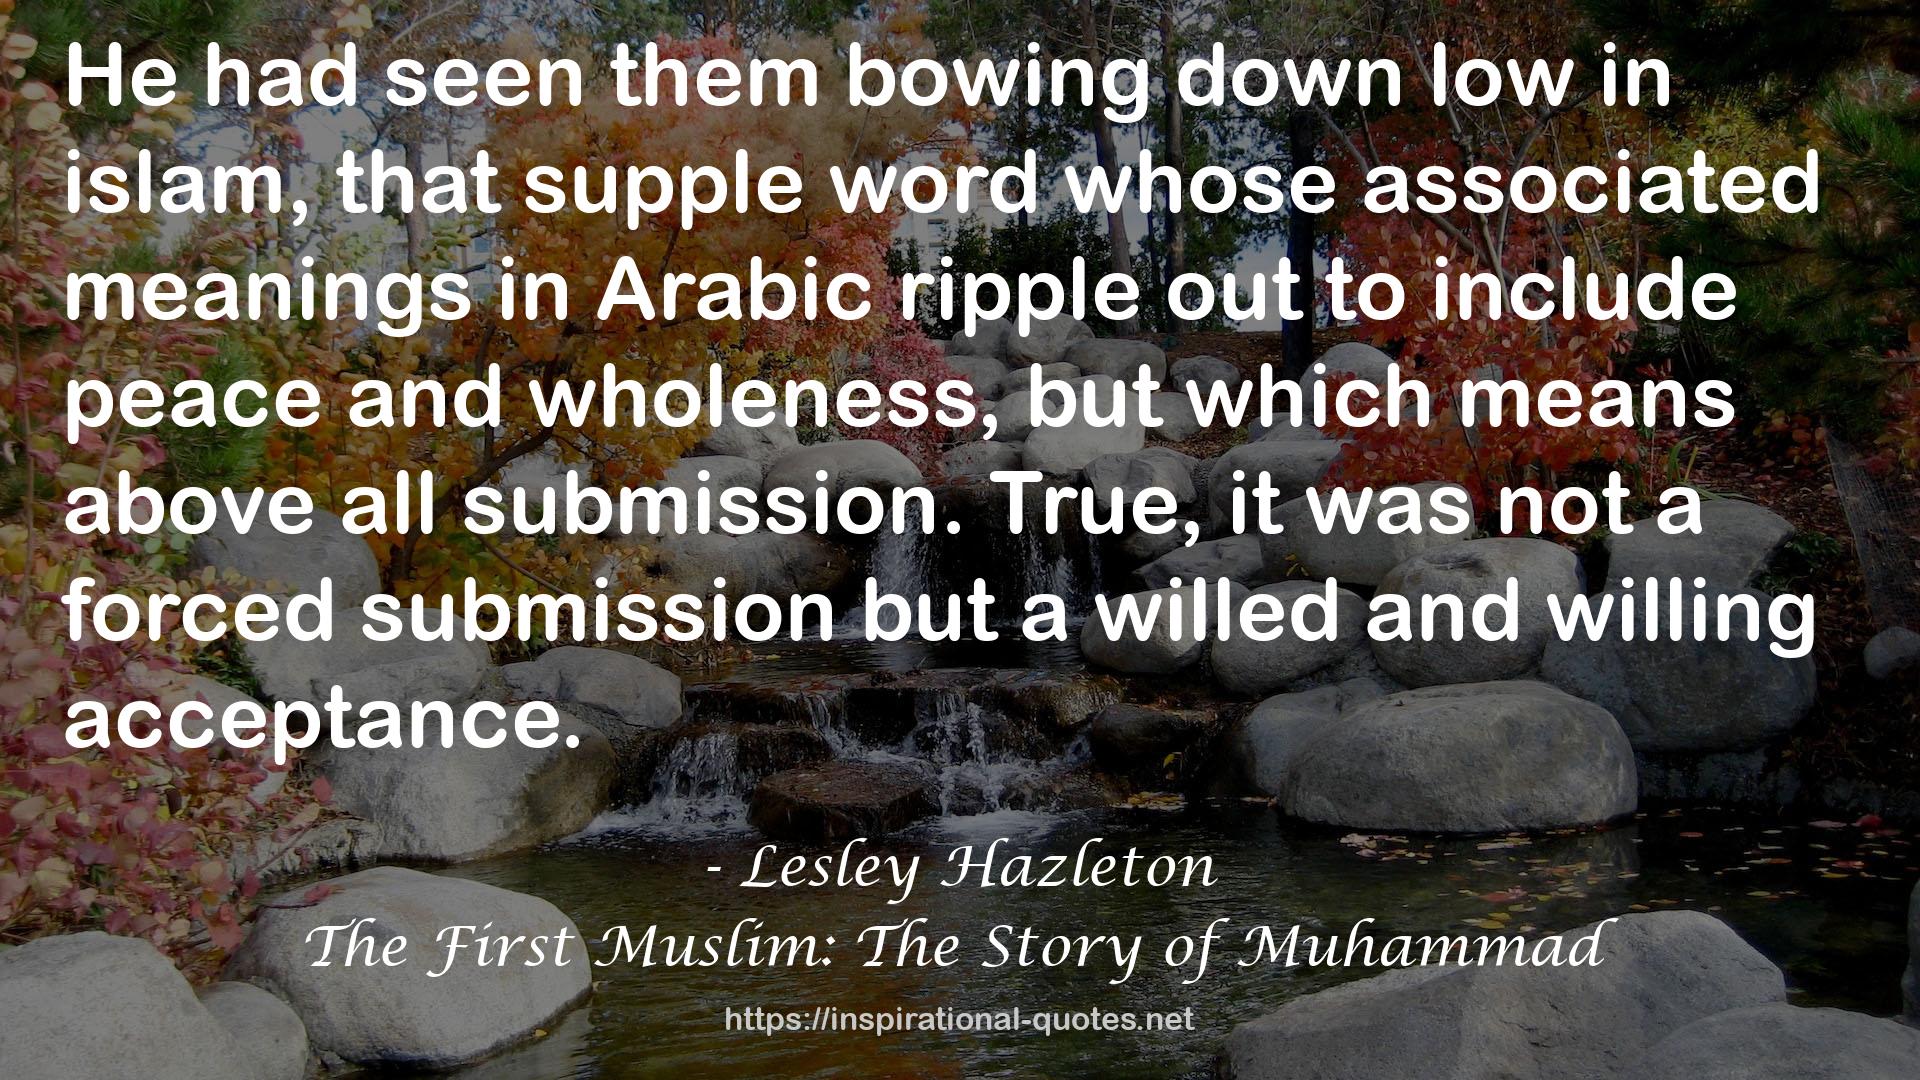 The First Muslim: The Story of Muhammad QUOTES